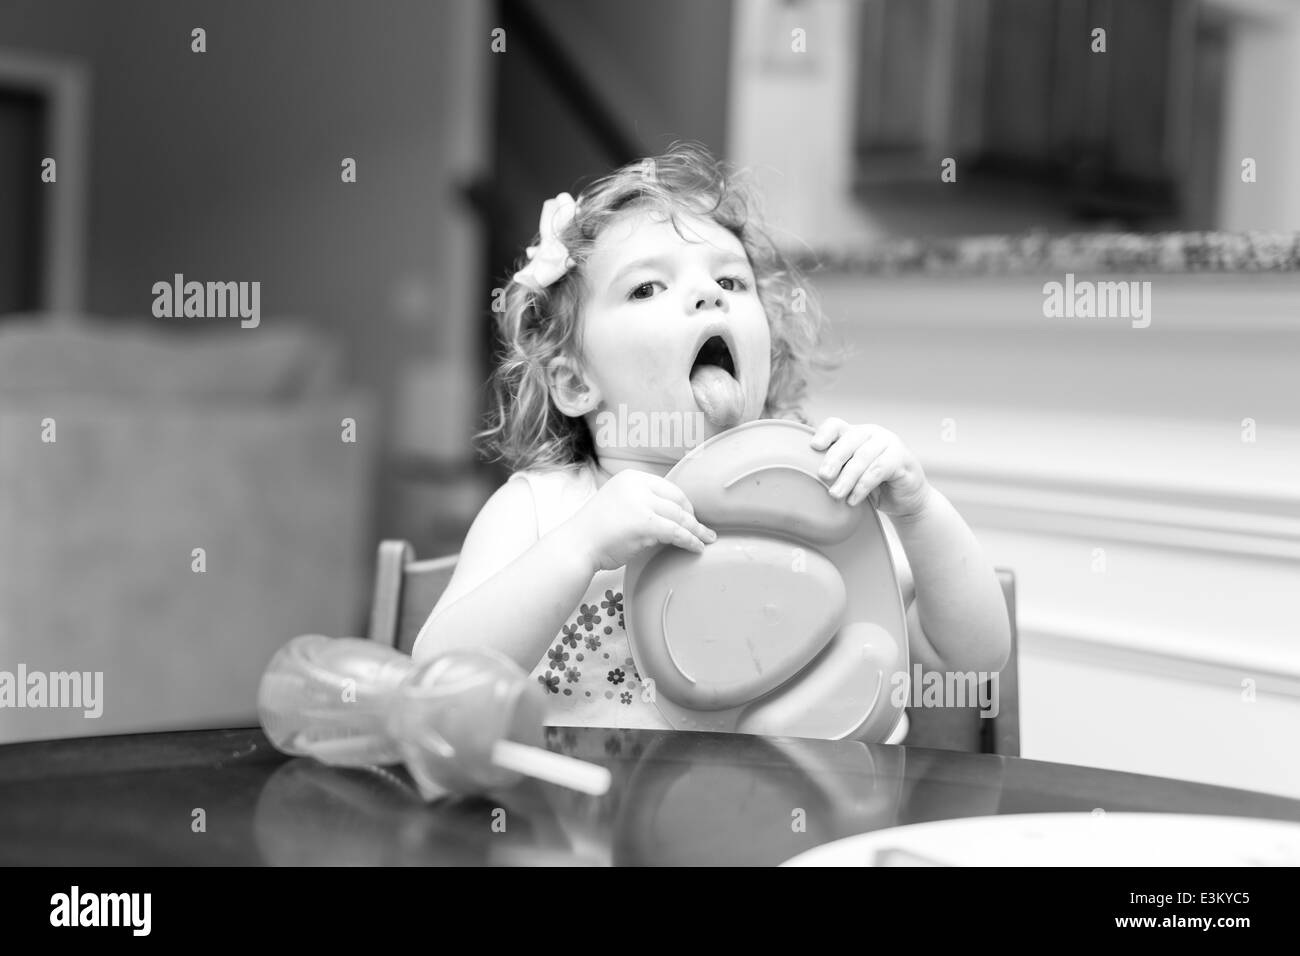 Little girl at dinner time making facial expressions Stock Photo